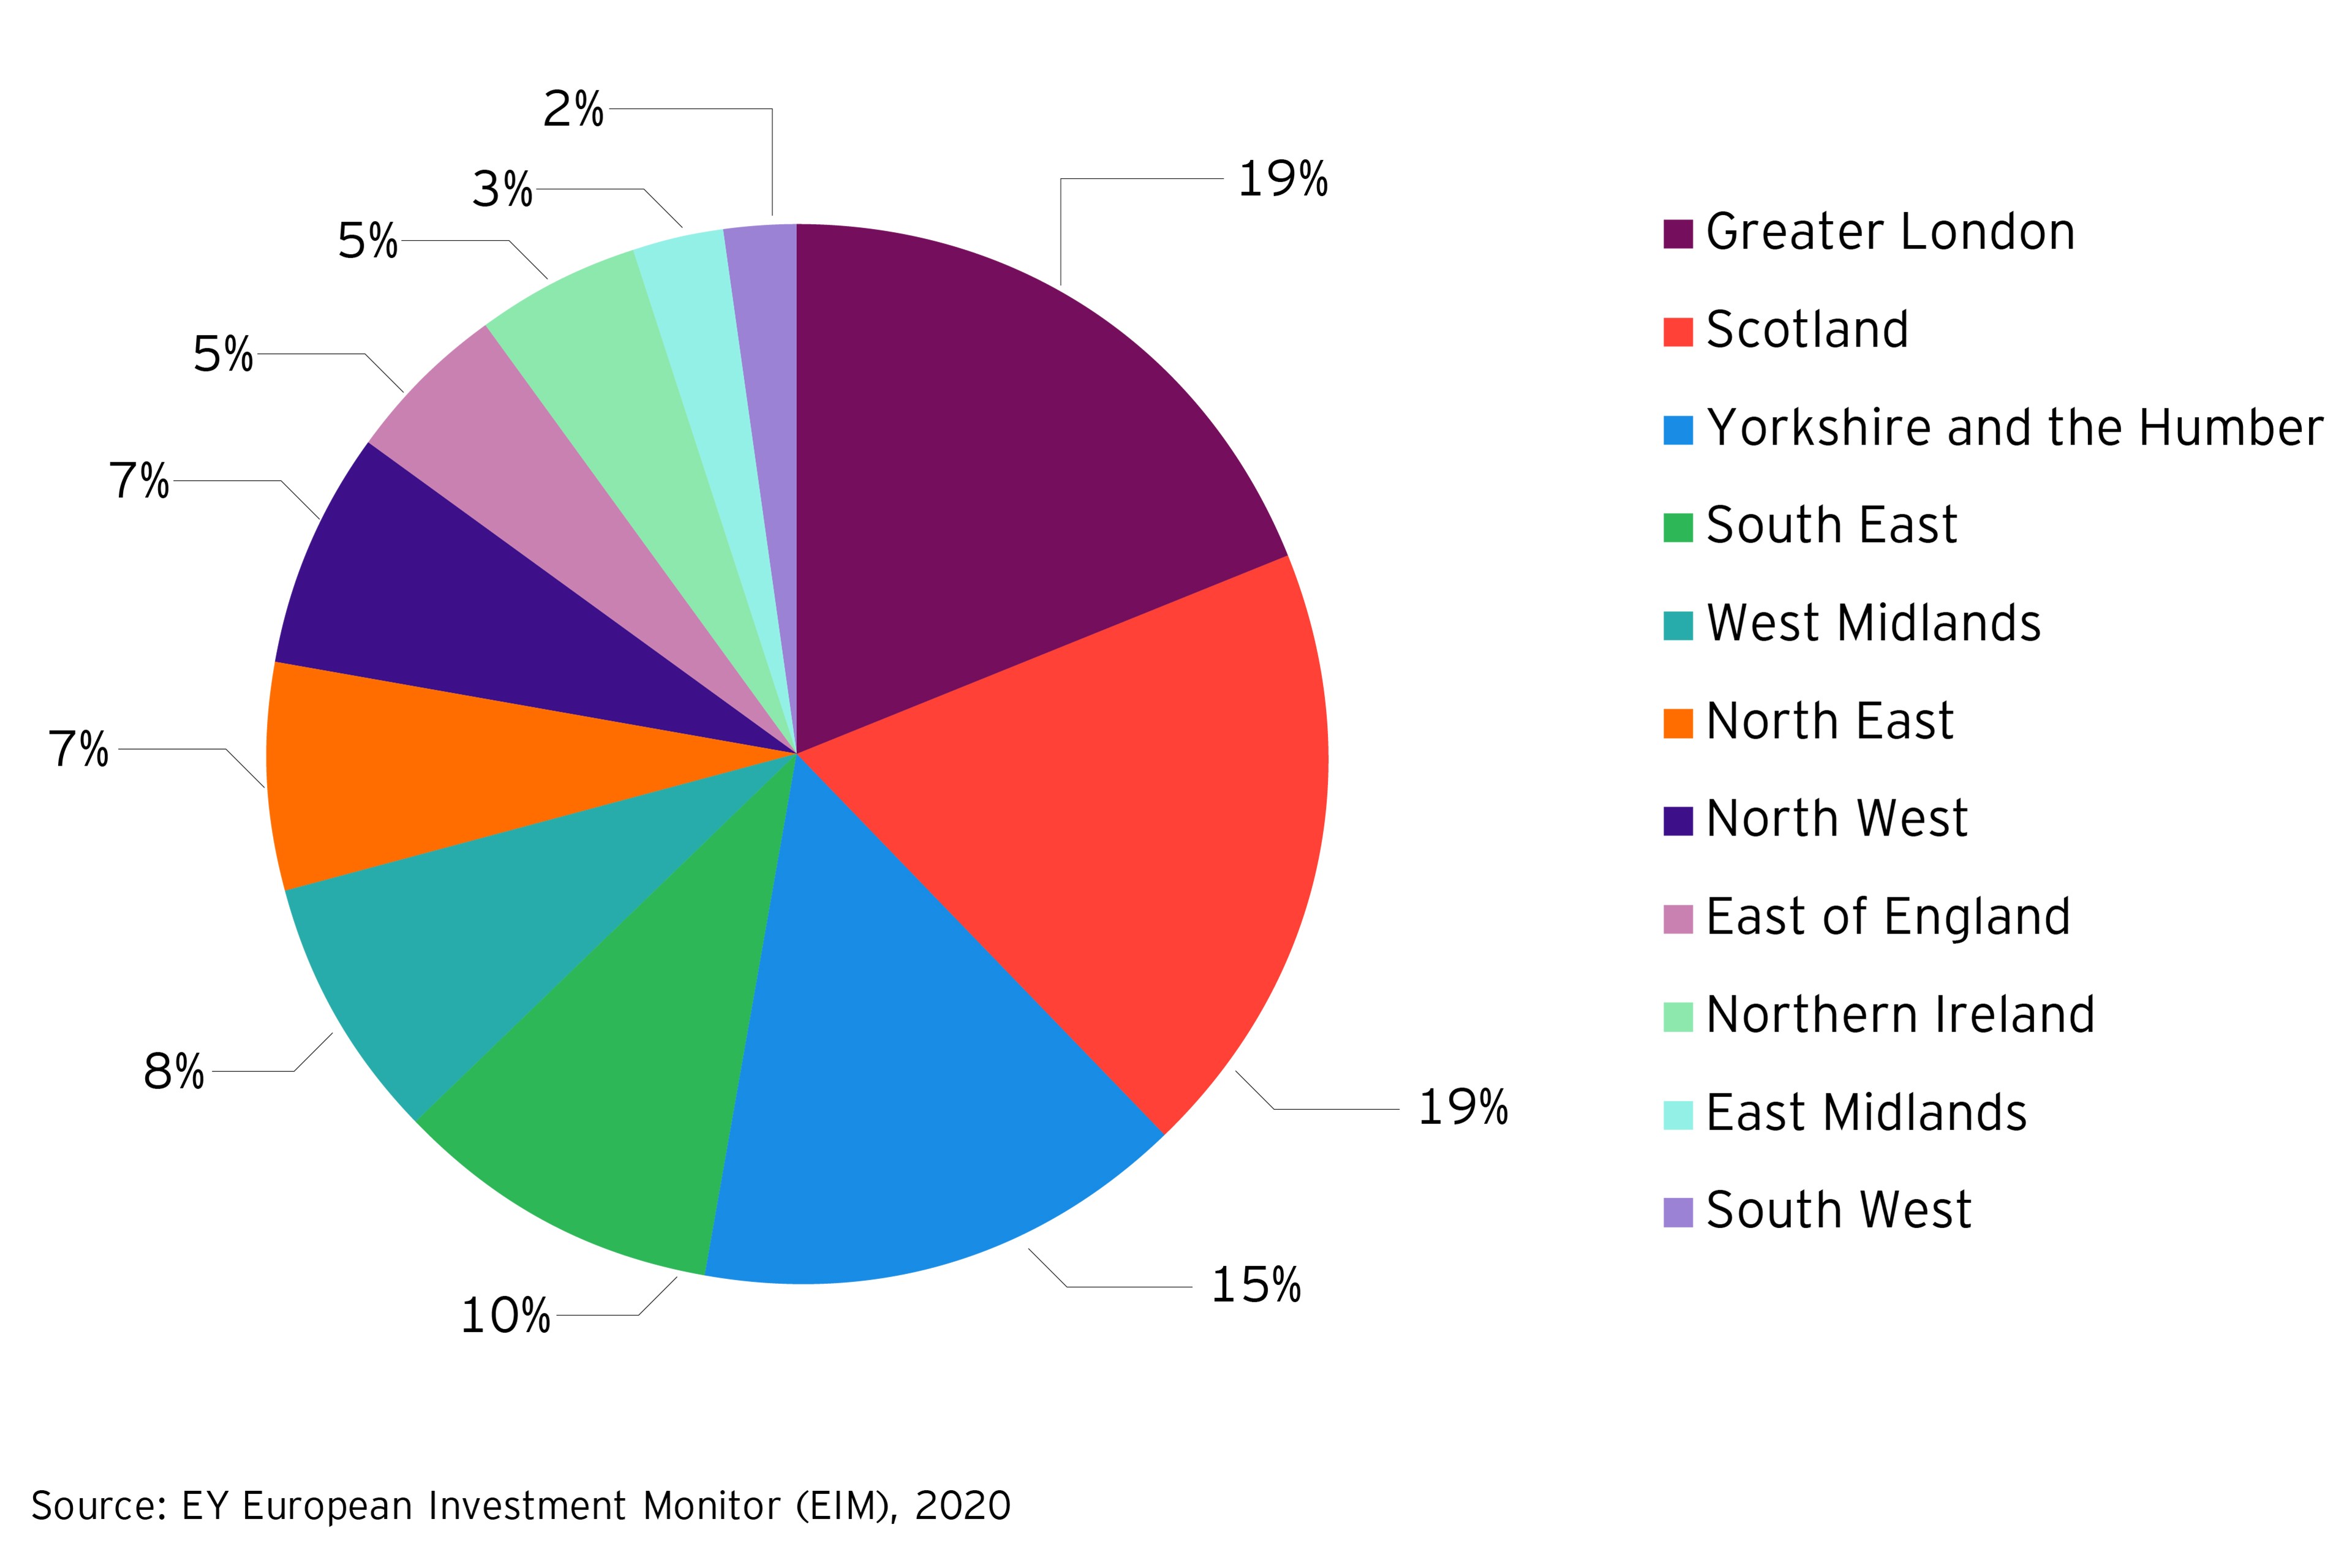 Top UK regions to receive cleantech FDI projects 2020